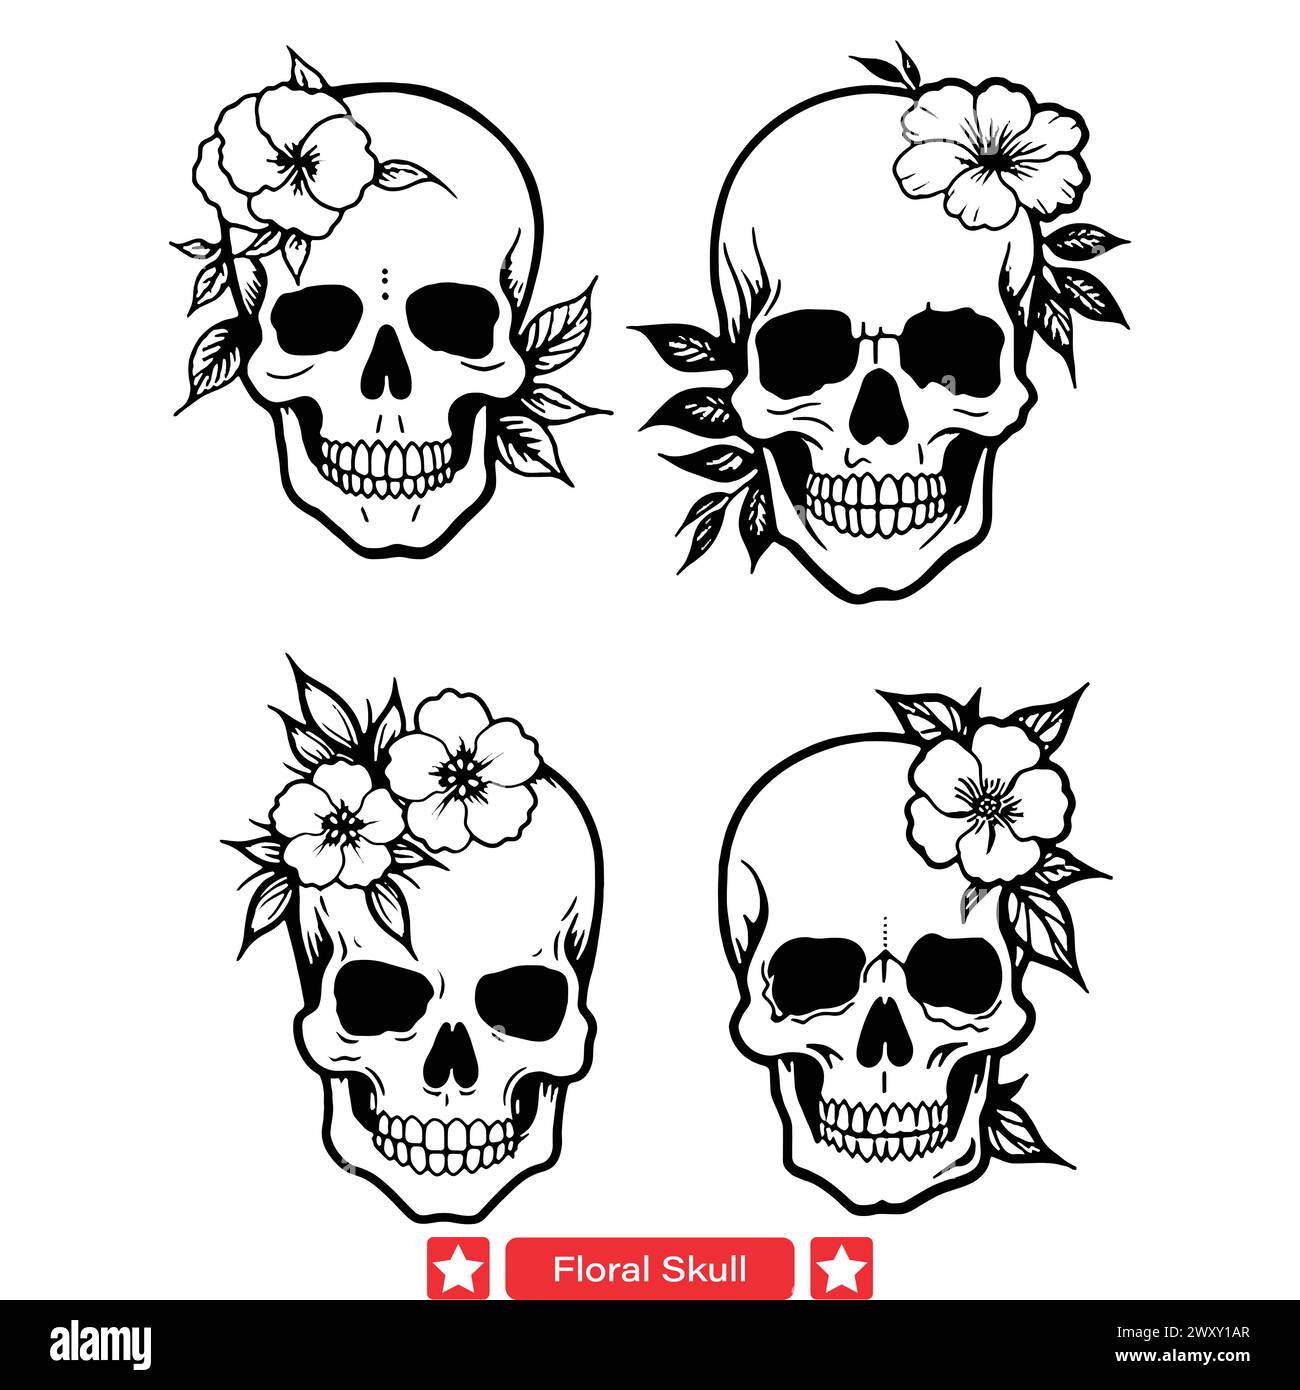 Floral Fusion  Enchanting Skull Silhouette Vectors Adorned with Flowers Stock Vector